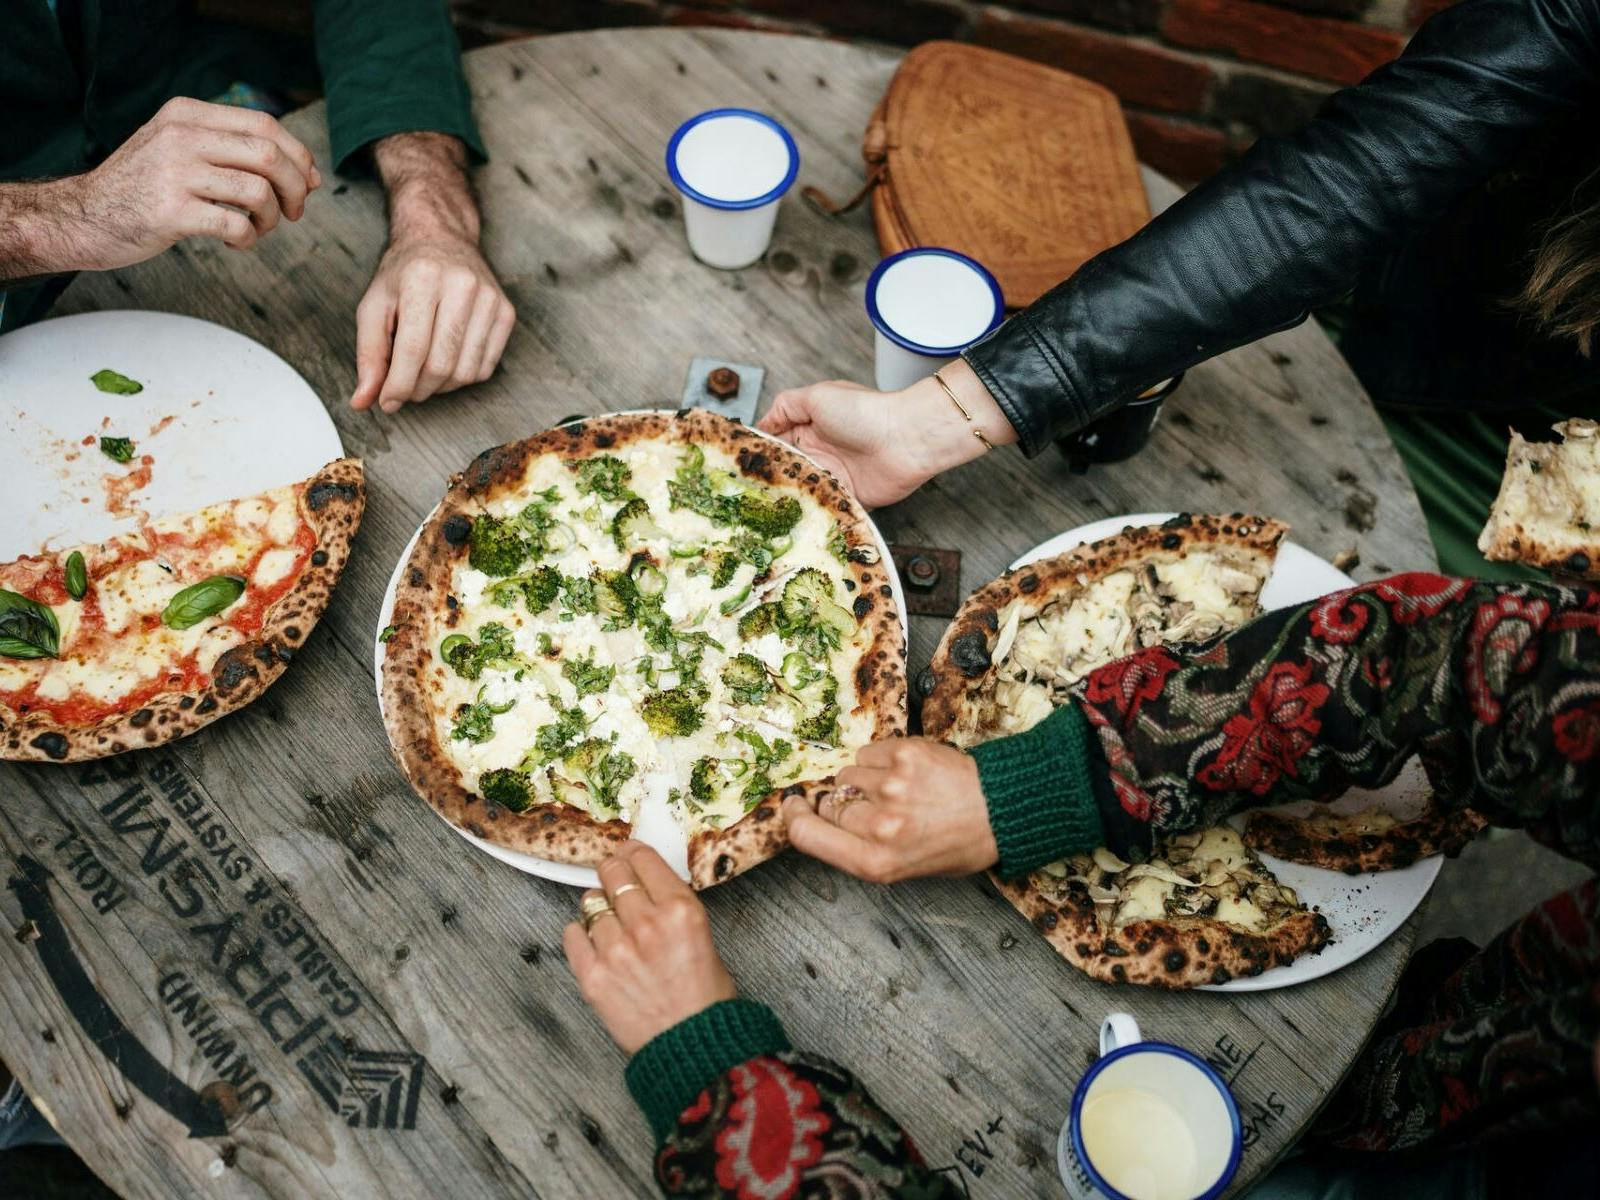 Three cheesy pizzas, one half eaten with  people reaching for pieces sitting at a round wood table